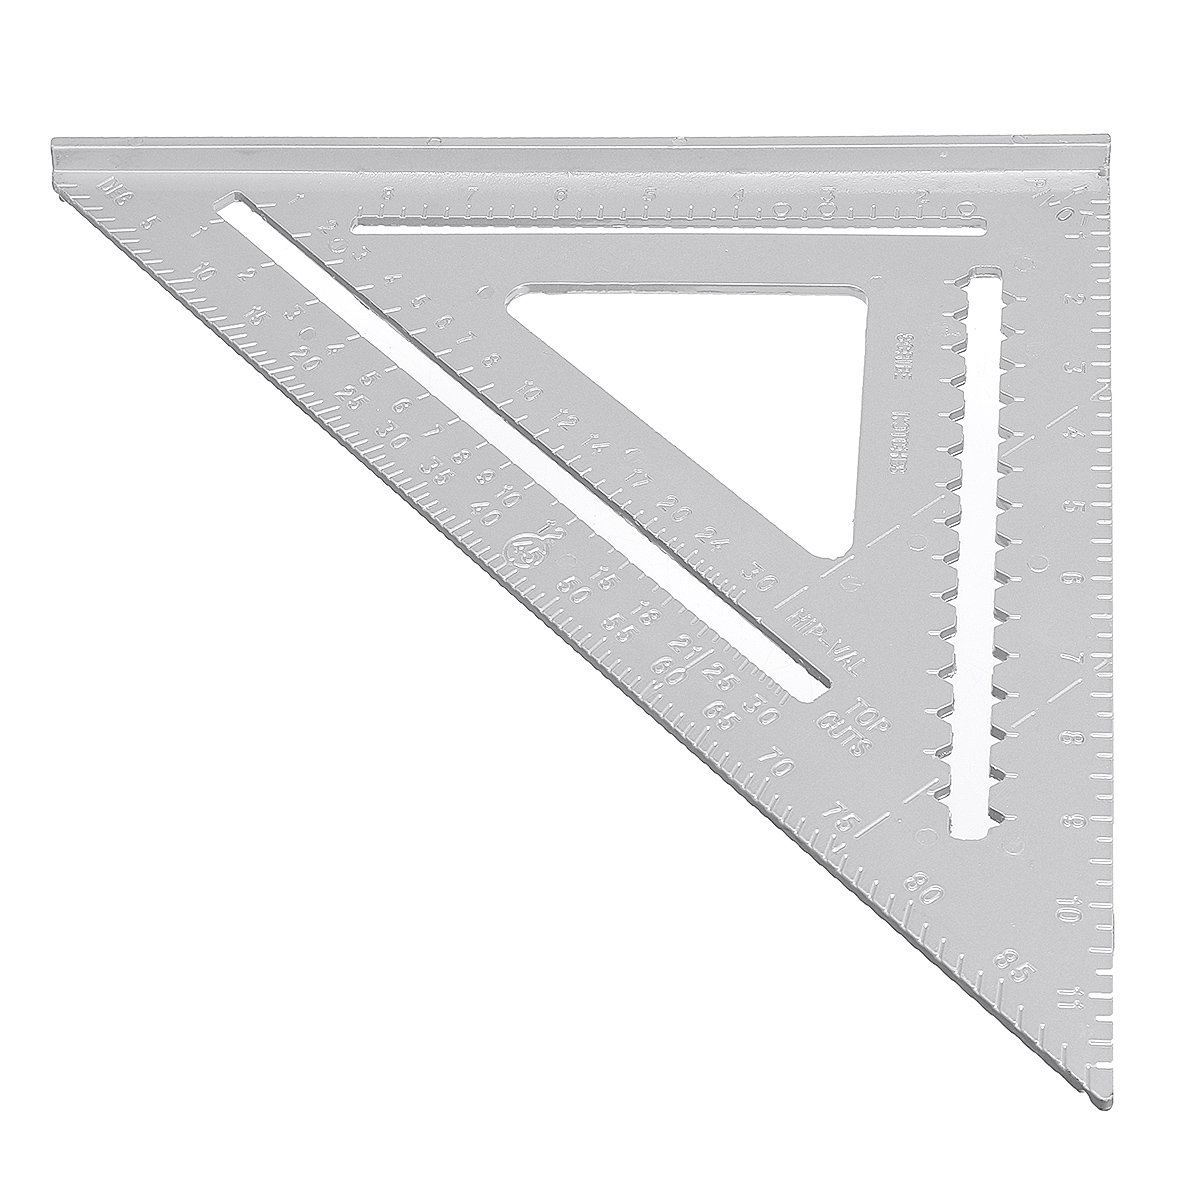 12inch-Aluminum-Alloy-Right-Angle-Triangle-Ruler-Protractor-Framing-Measuring-Tools-1597414-3